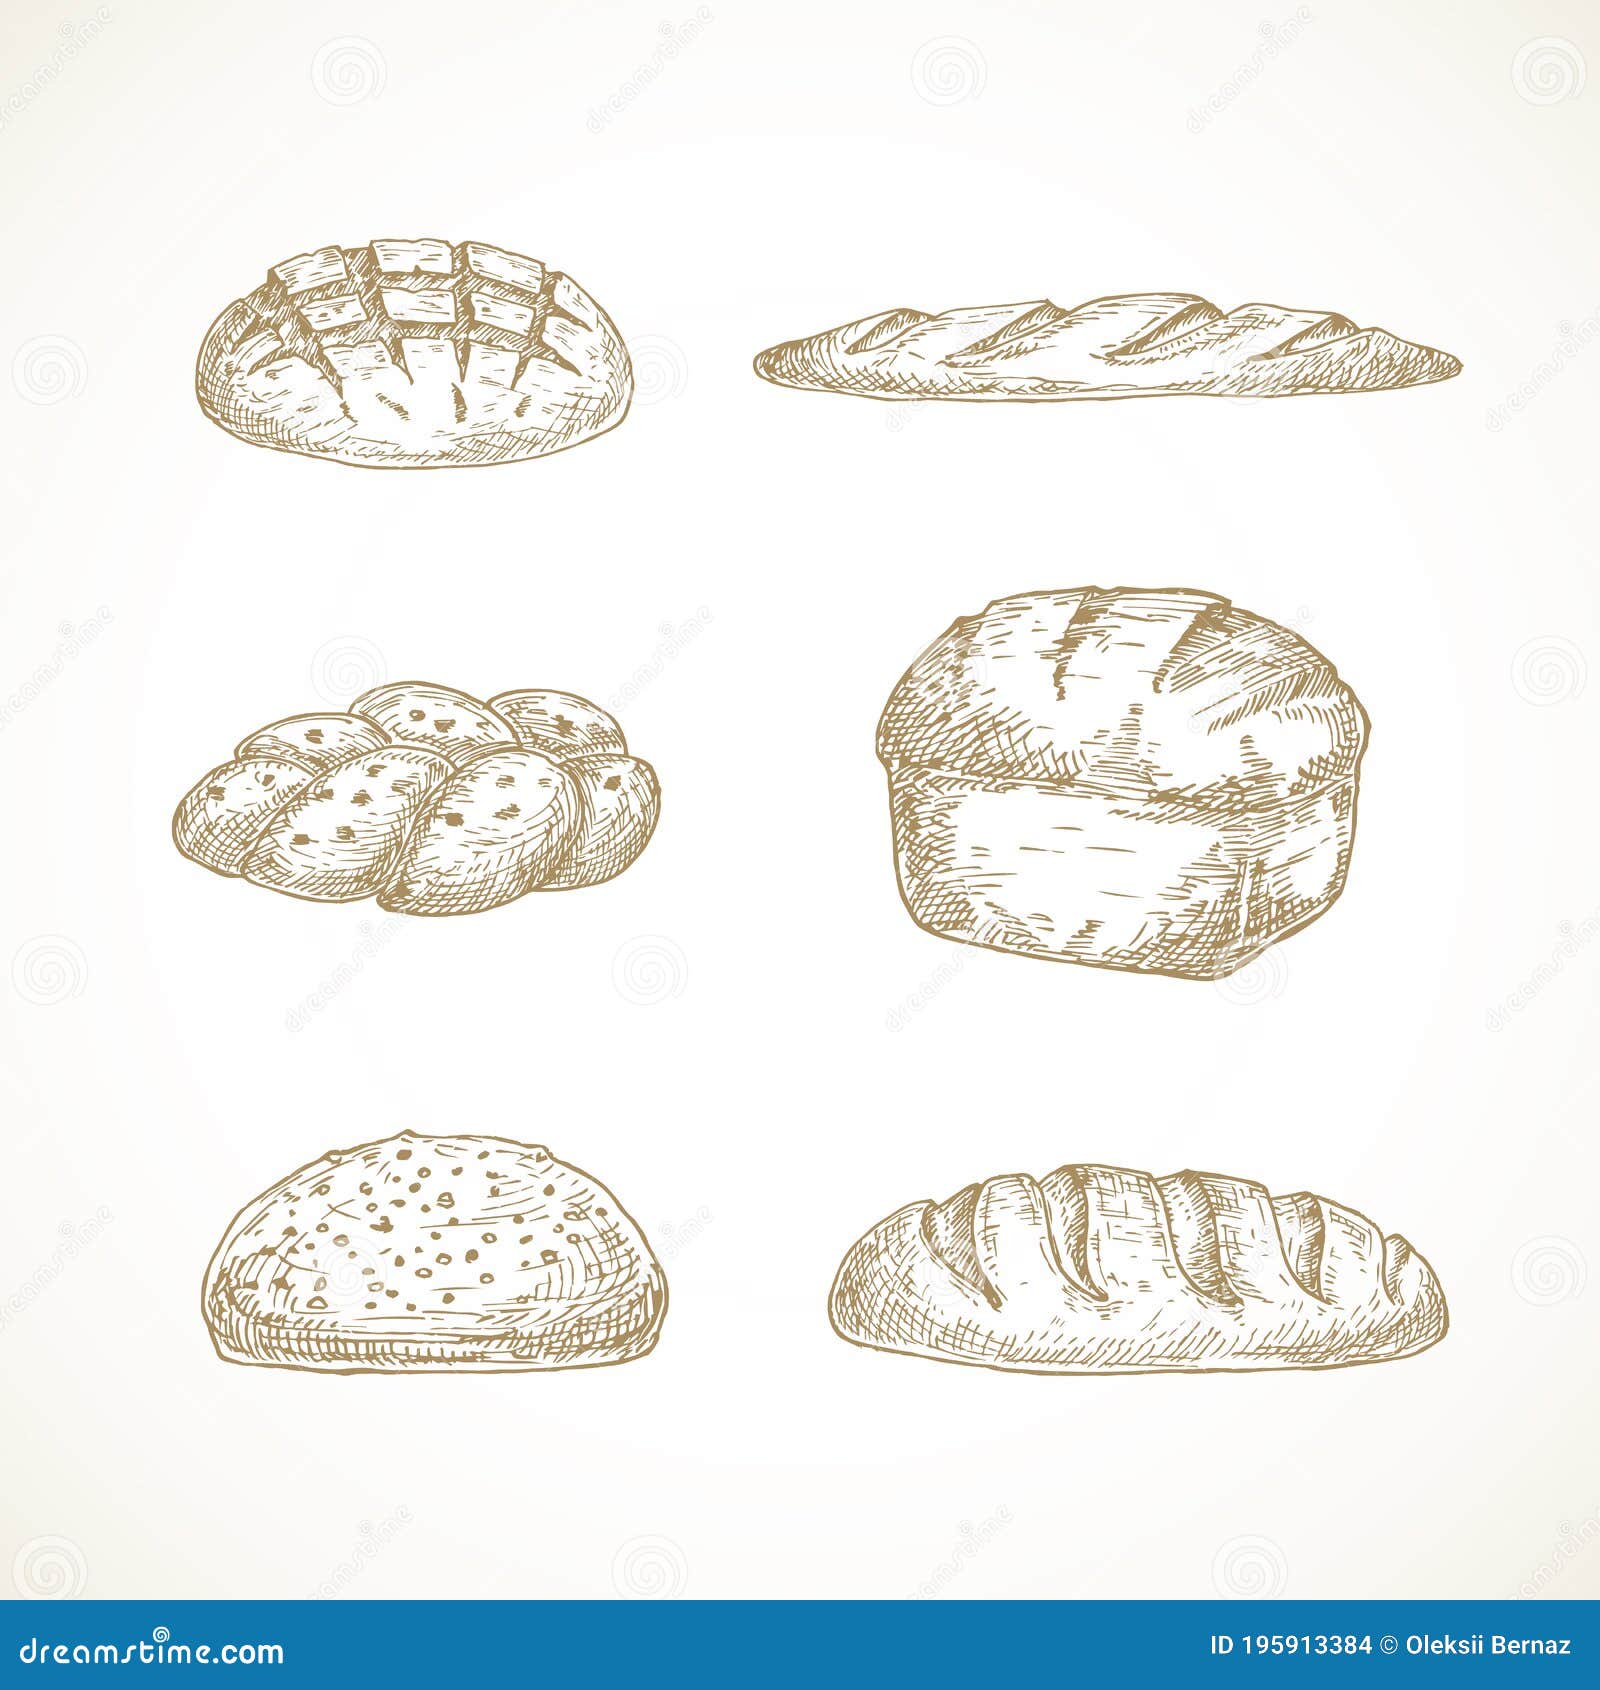  brread sketches set. hand drawn s of challa, sourdough loaf, brick and baguette.